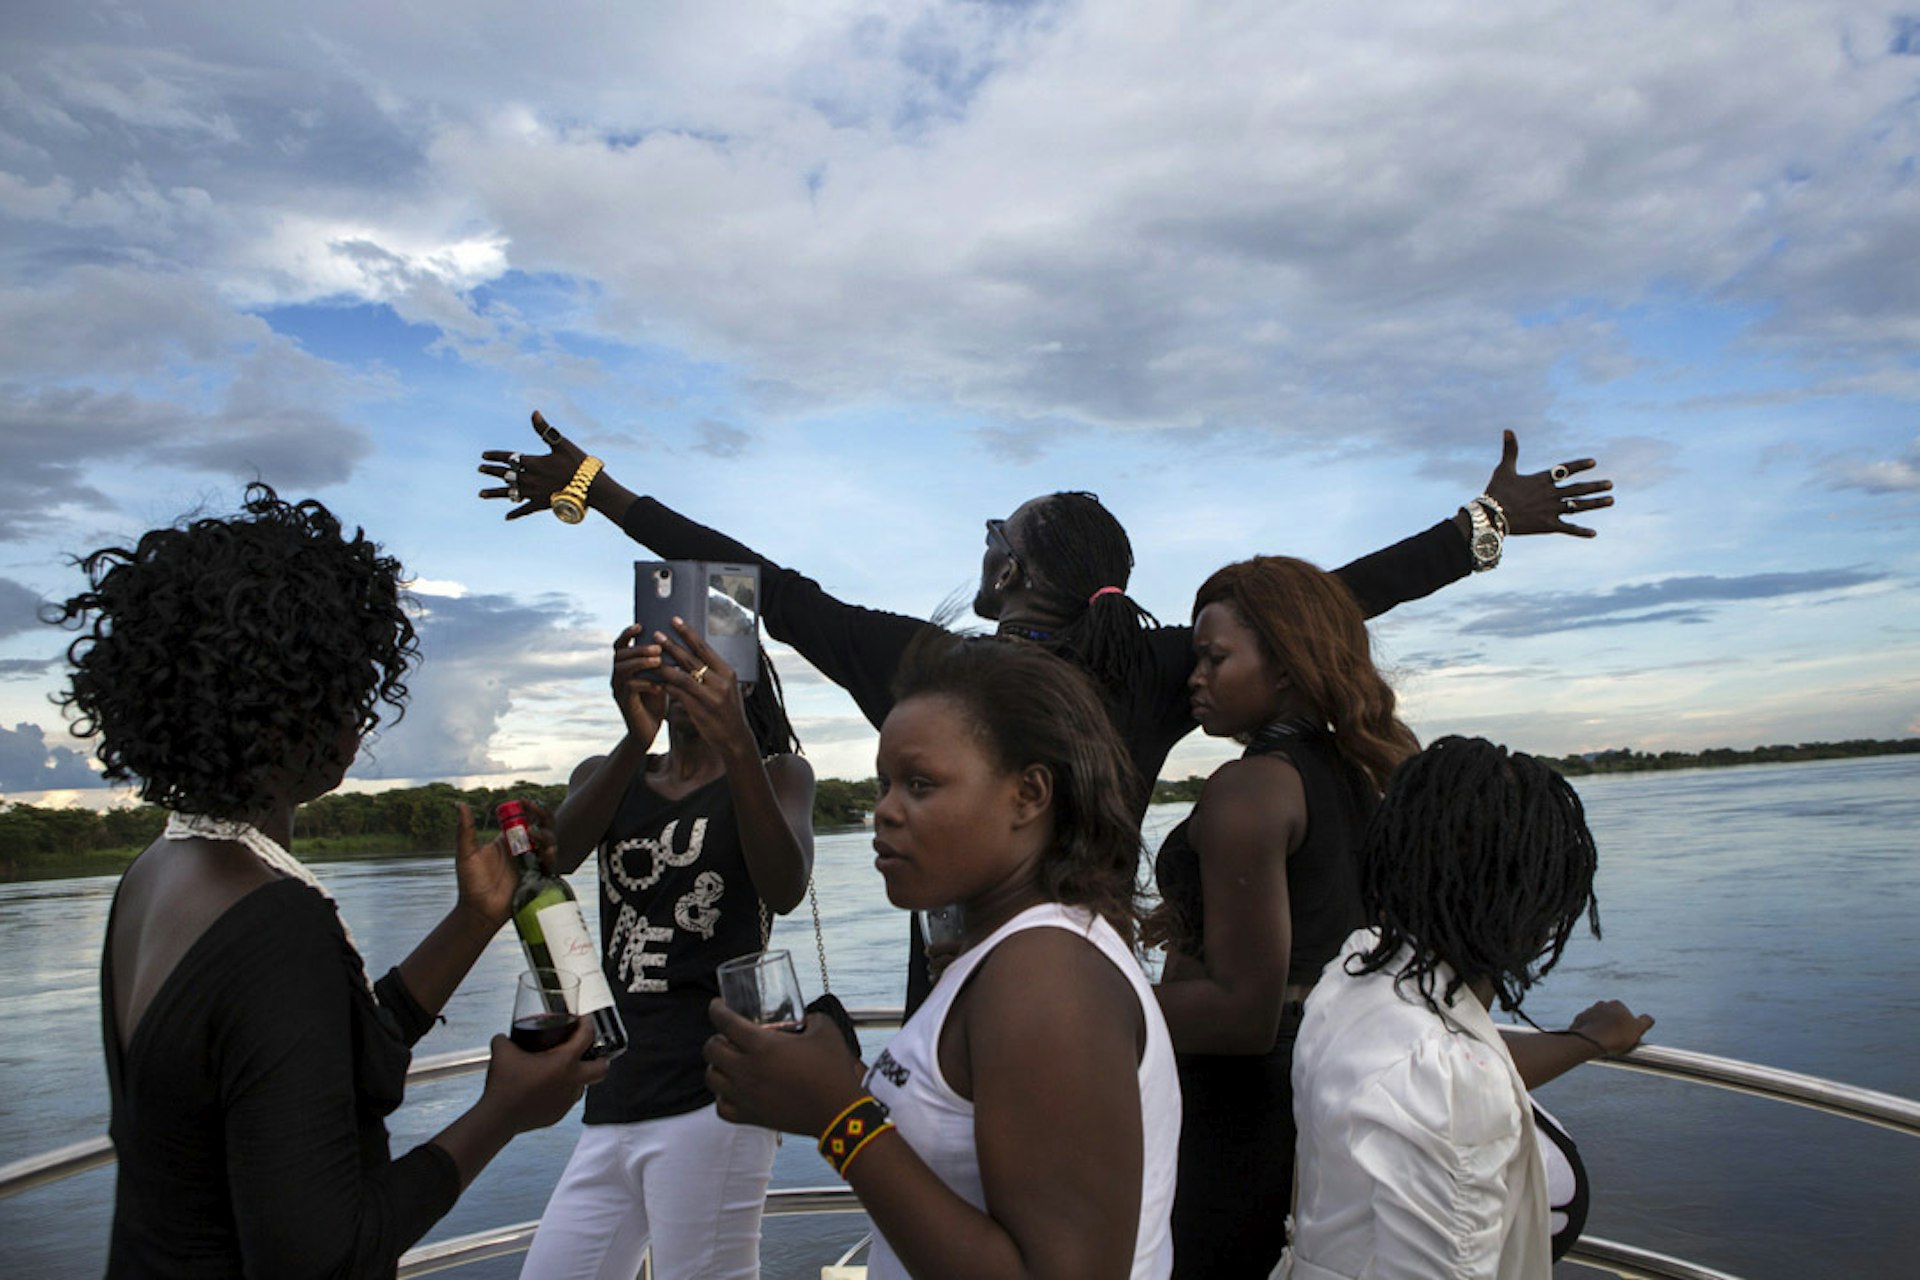 South Sudan’s youth come of age in the face of chaos